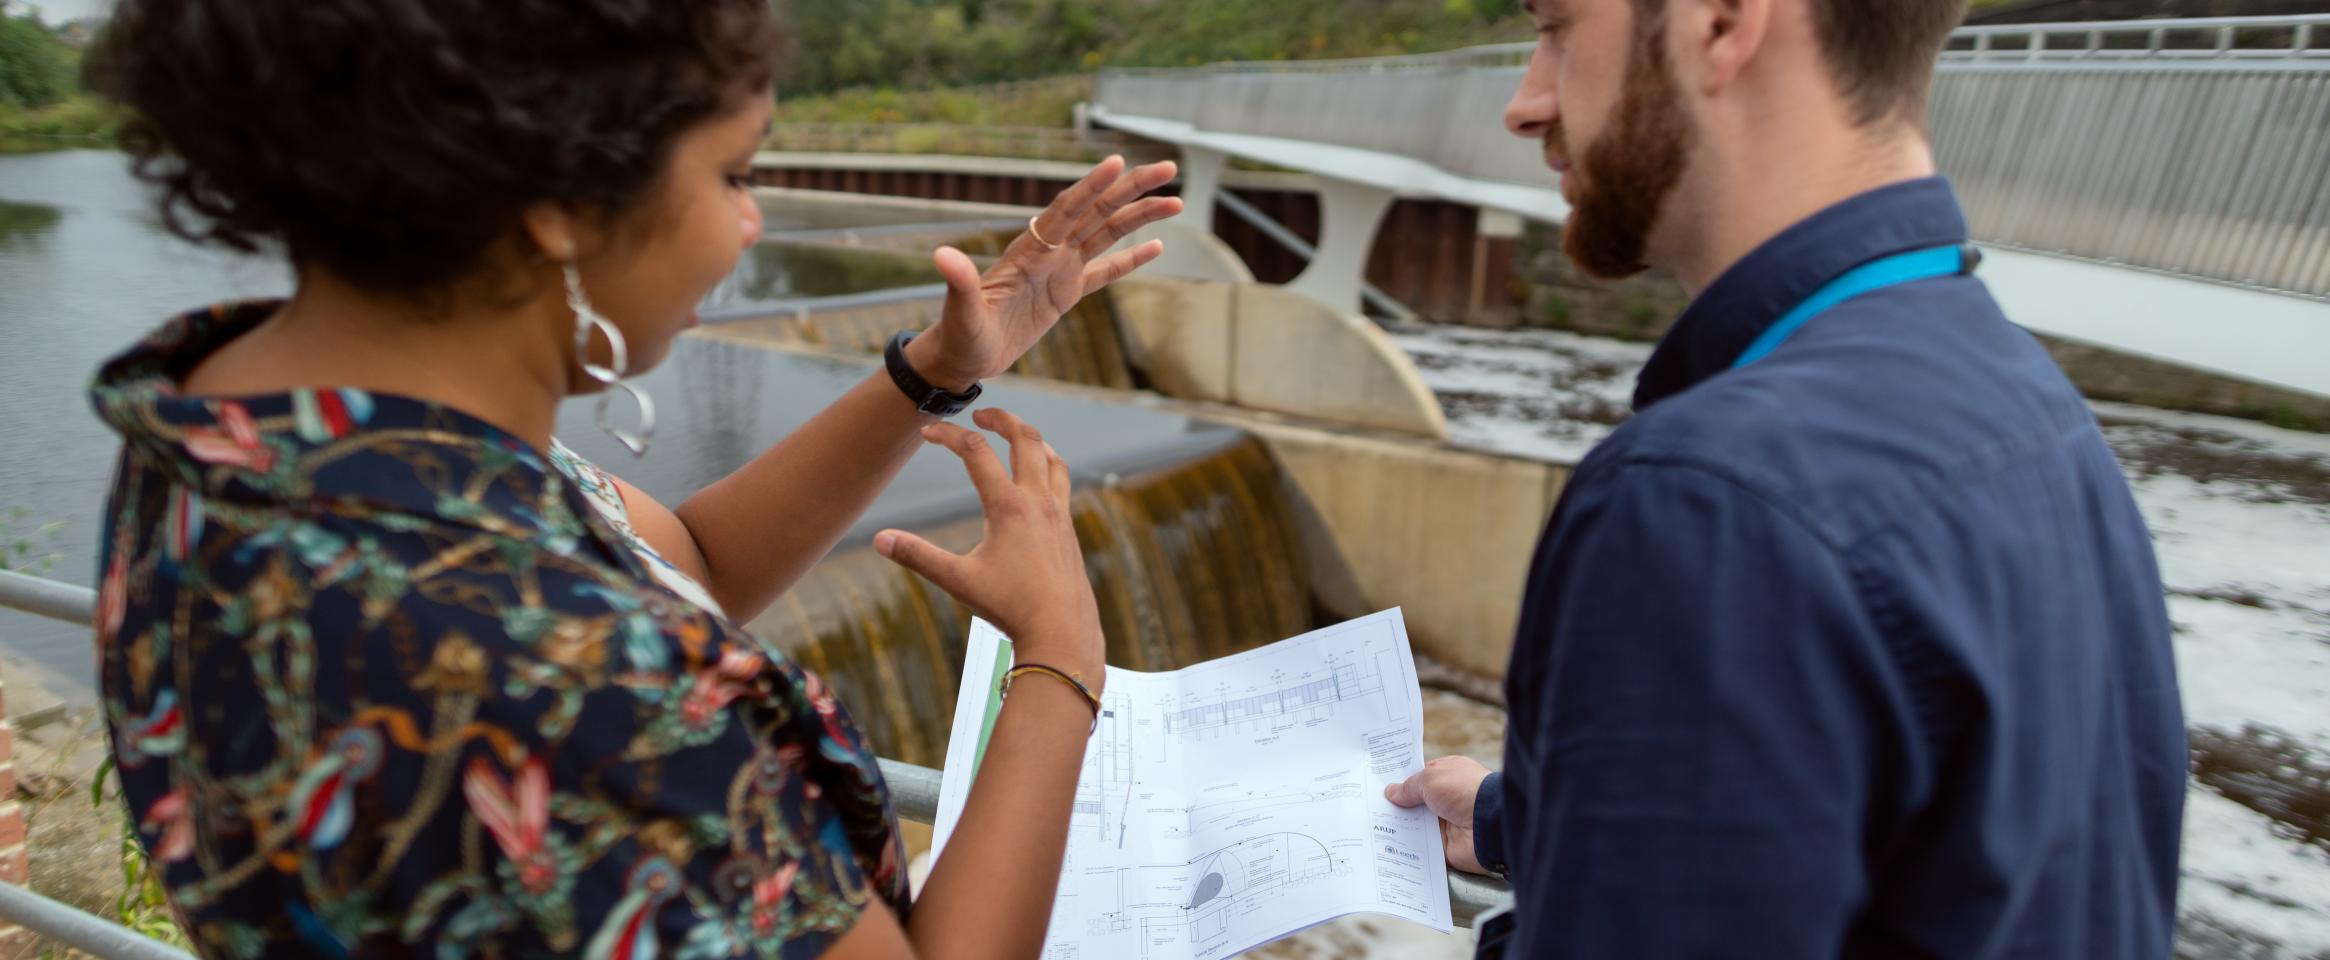 Civil engineer discusses weir plans with colleague